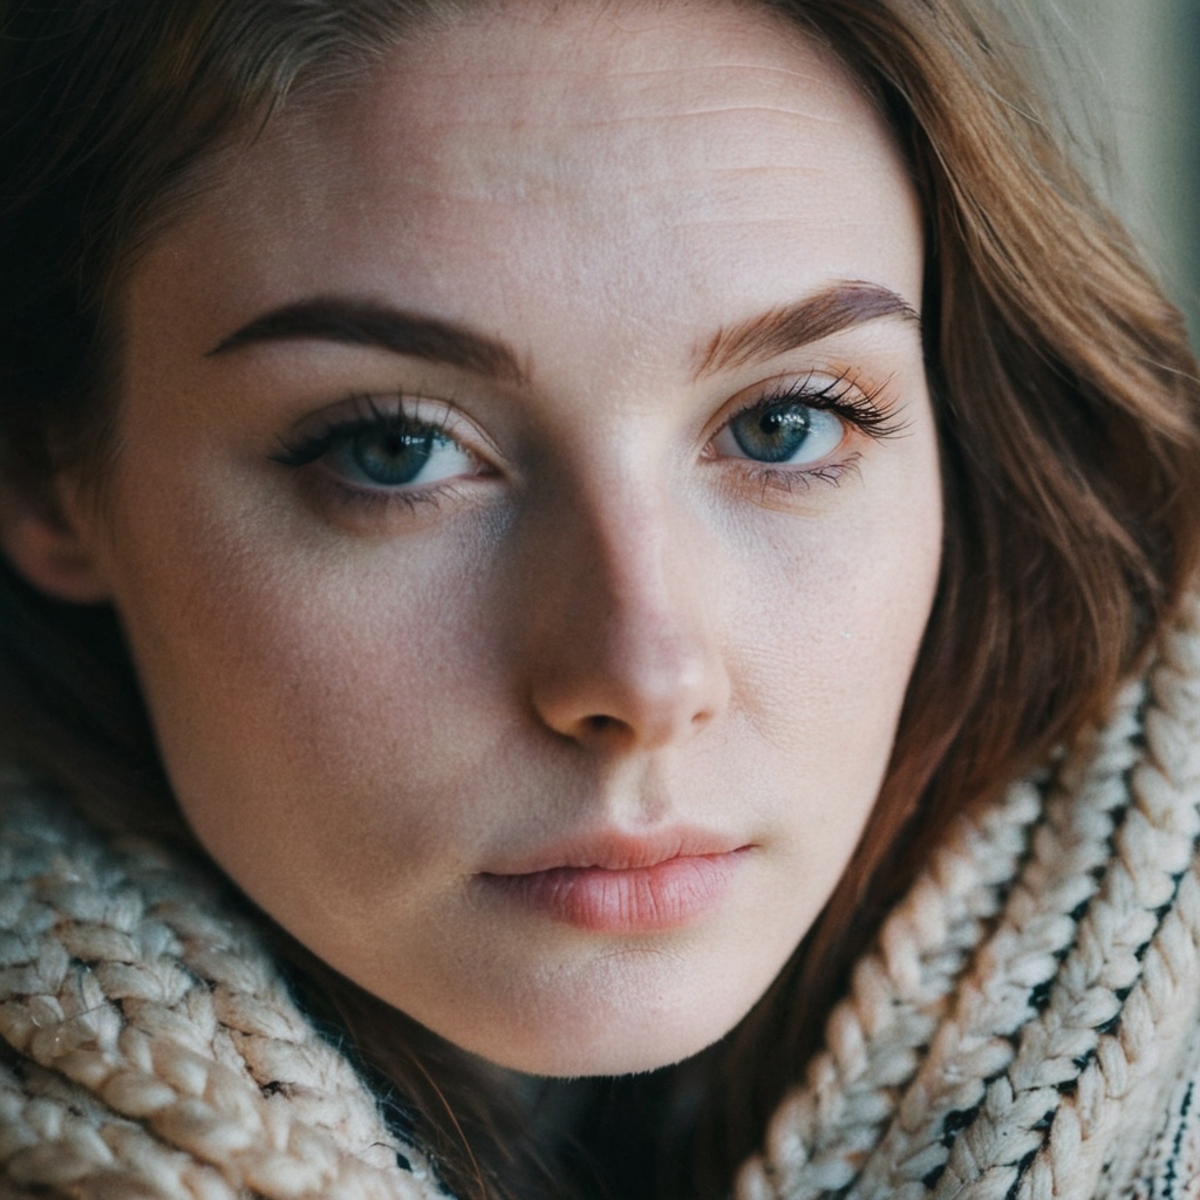 A young woman with big blue eyes and brown hair wearing a knitted scarf.